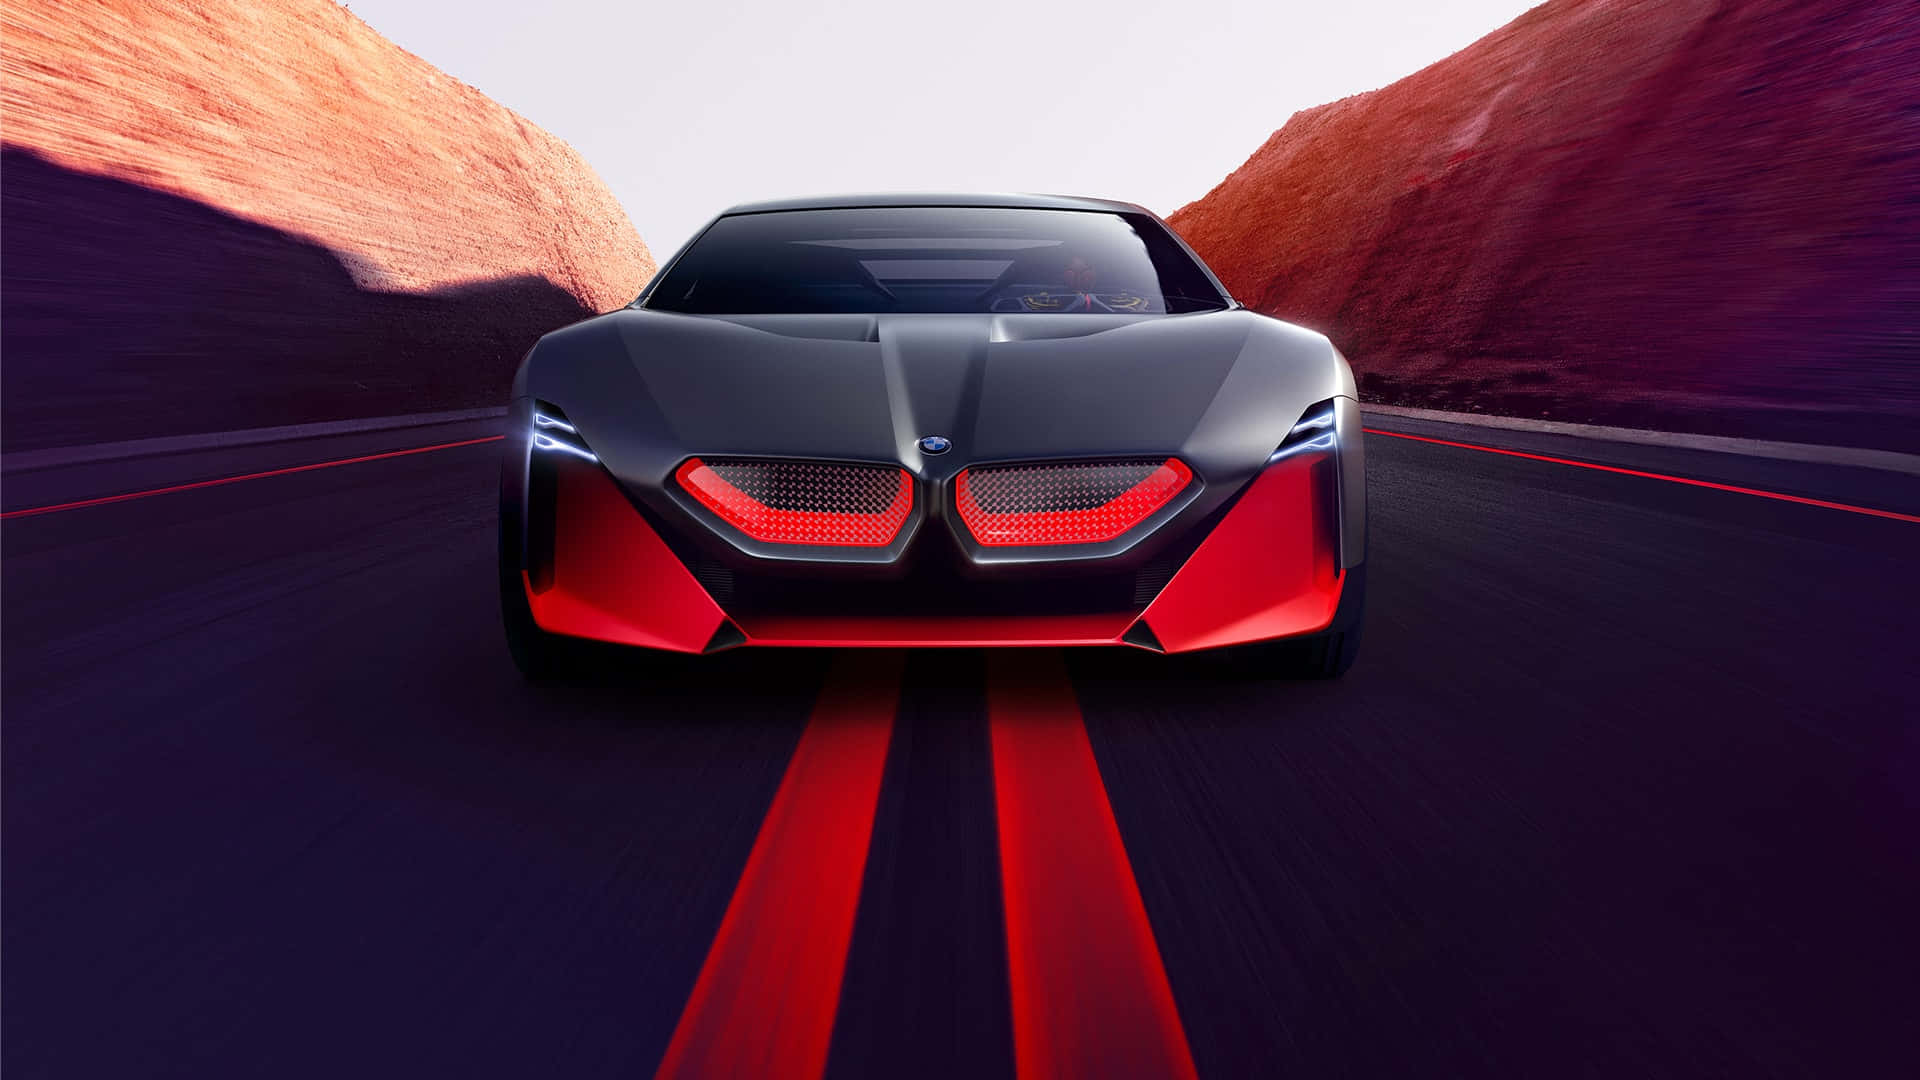 Bmw I8 Concept Car Driving Down A Mountain Road